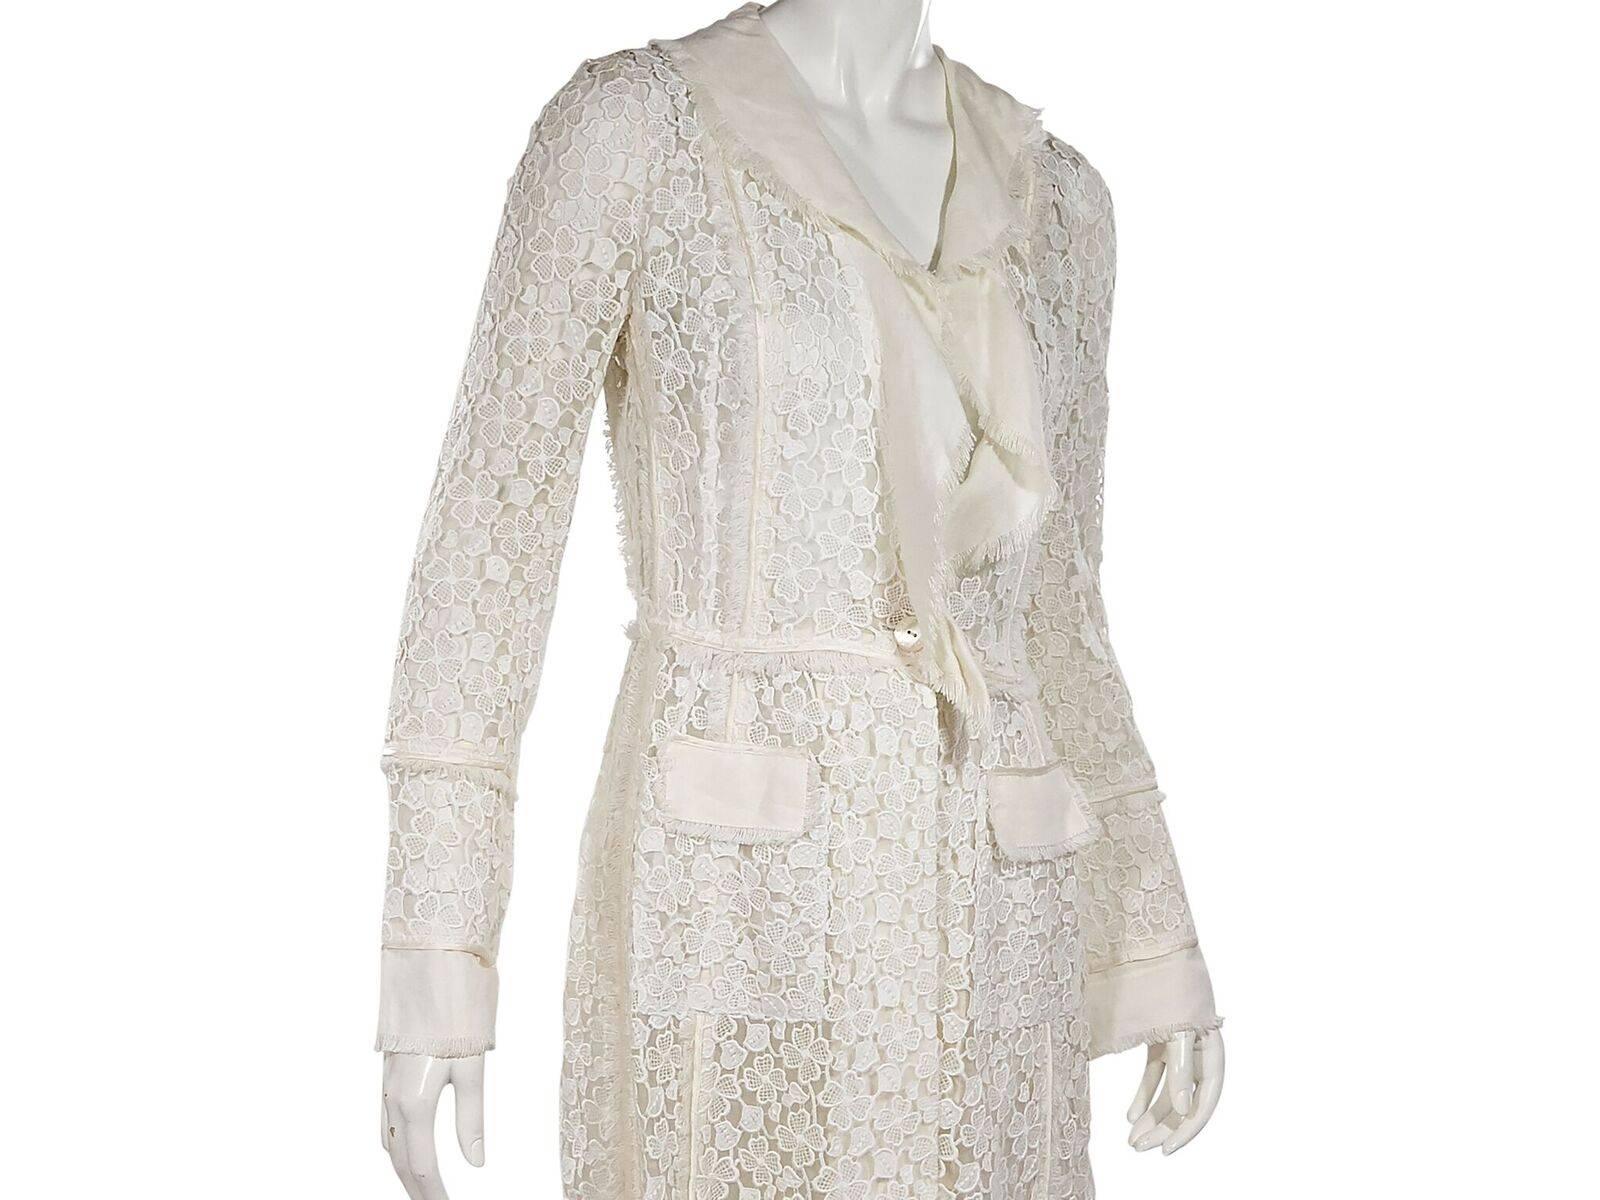 Product details:  White ruffle-trimmed lace coat by Dolce & Gabbana.  Long sleeves.  Single-button closure.  Waist patch pockets.  36